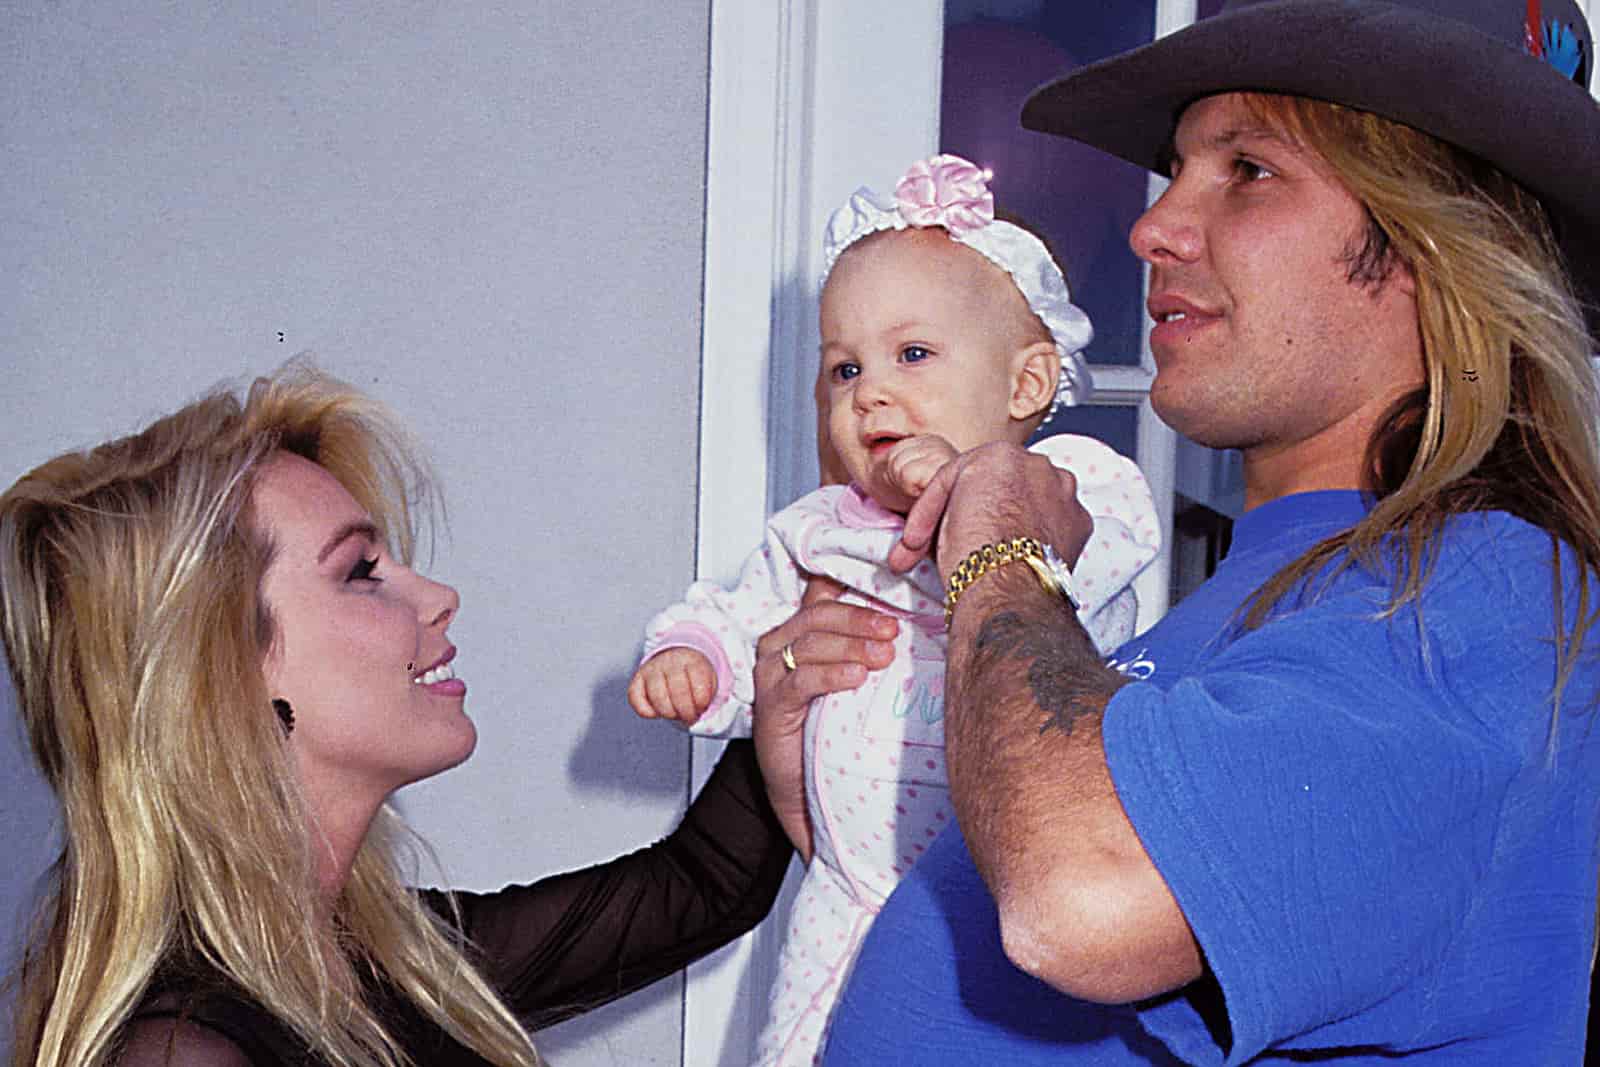 Image of Vince Neil and ex-wife Sharise Ruddell with their late daughter, Skylar Lynnae Wharton